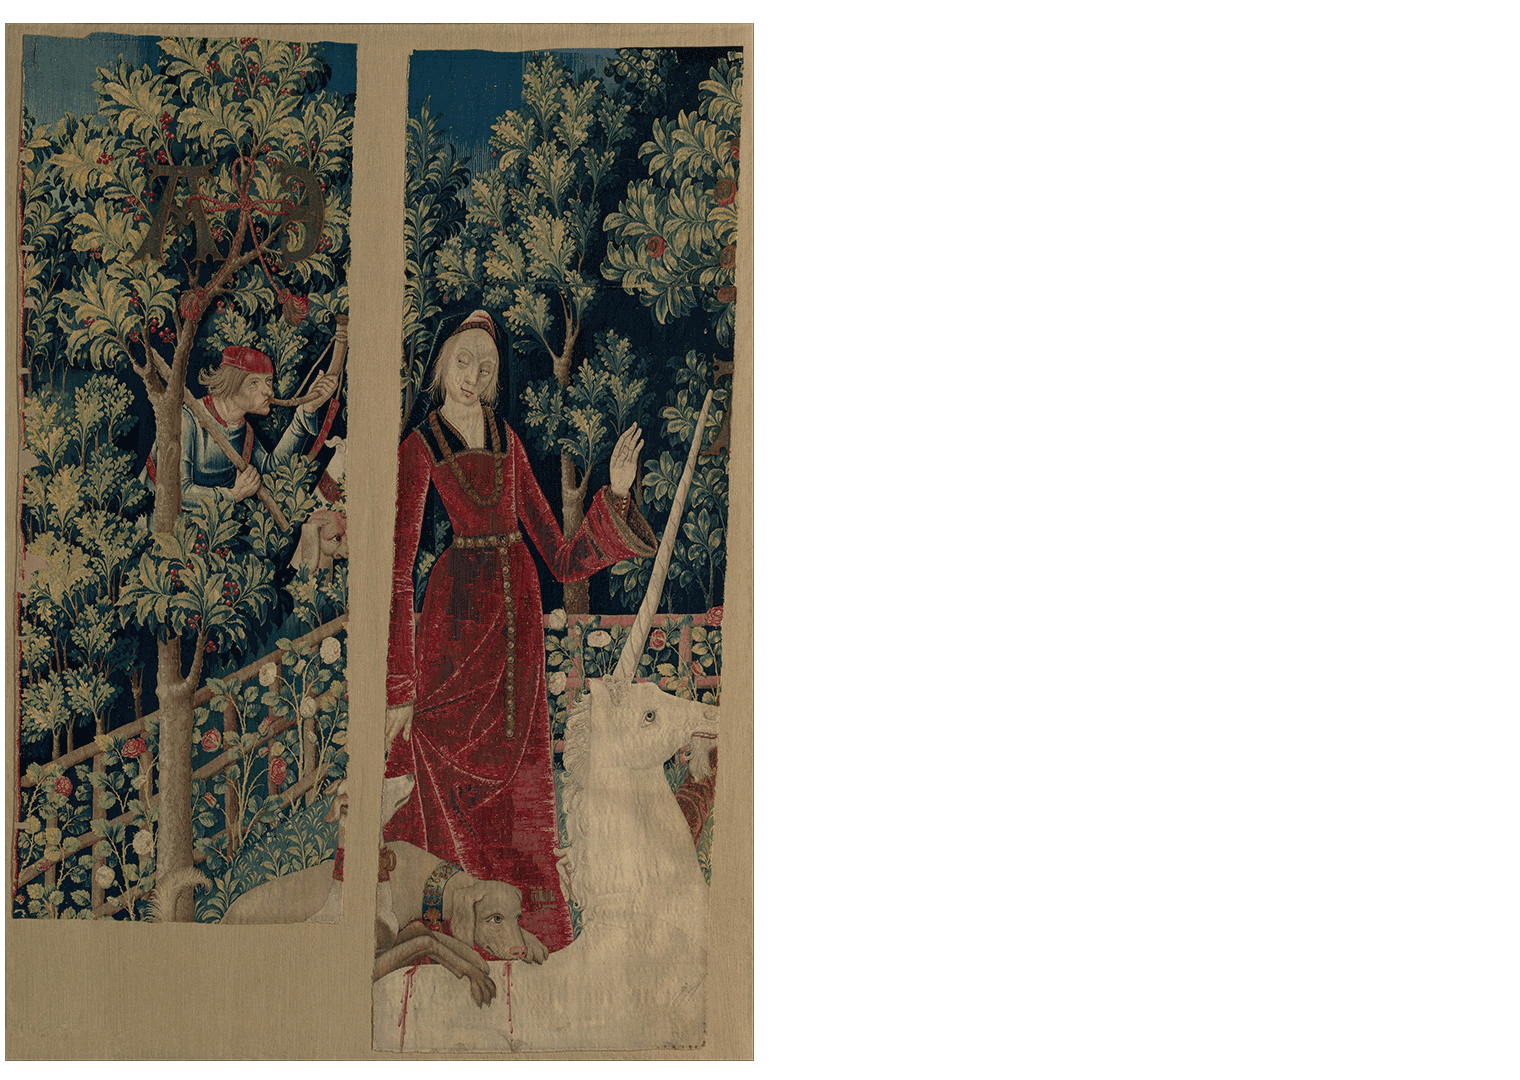 This image contains two fragments of a tapestry. On the left, a man sounds a horn from within the forest. To the right, a noble lady stands with her hand raised over the unicorn, which is kept in place by two hunting dogs.